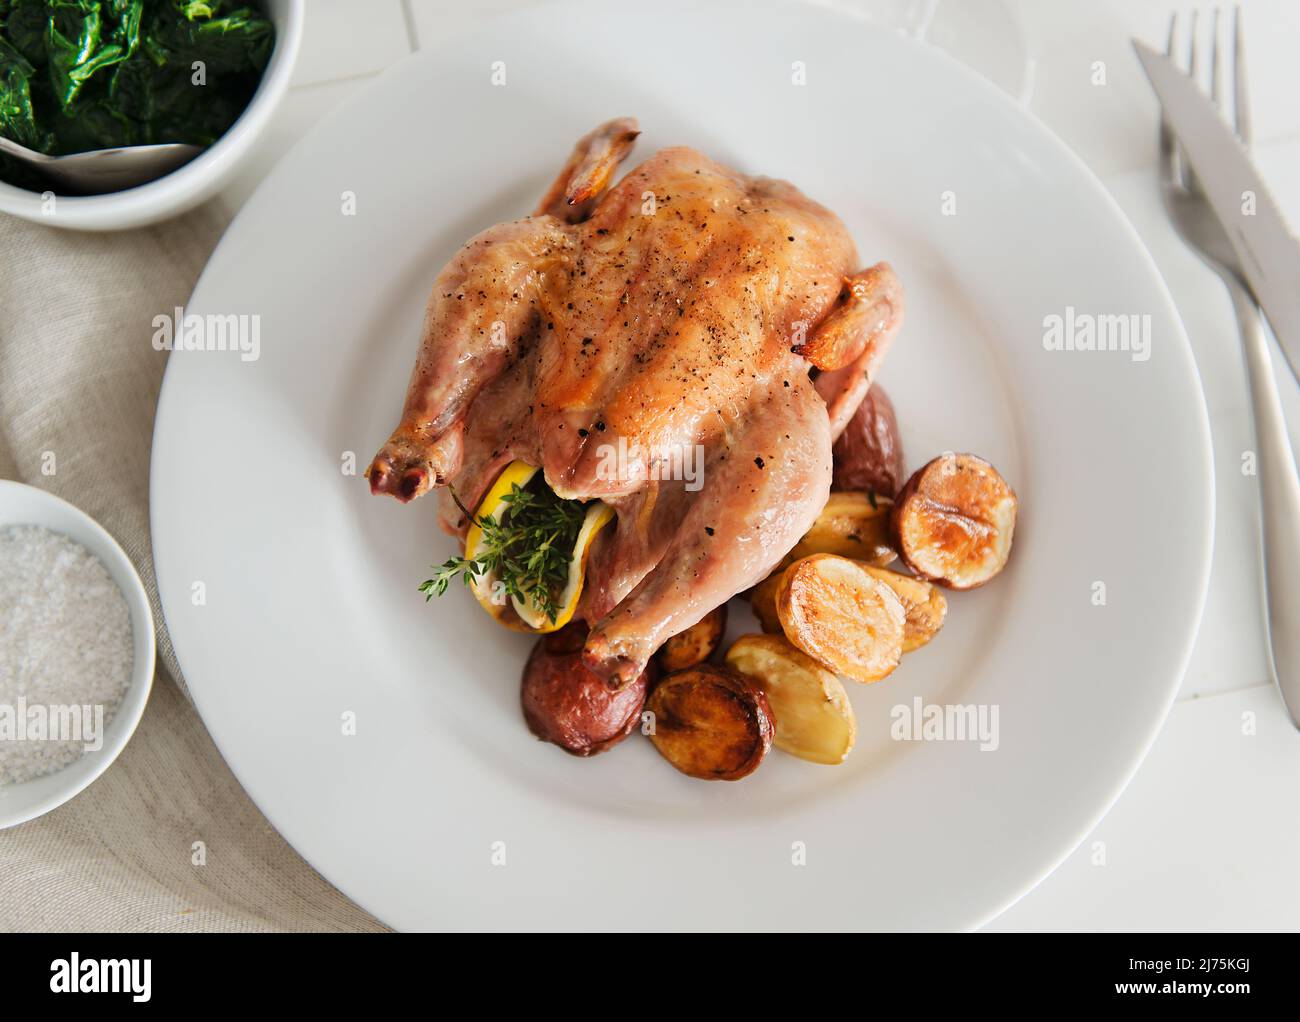 Roasted Lemon and Herb Stuffed Game Hen with a Side of Roasted Potatoes Stock Photo